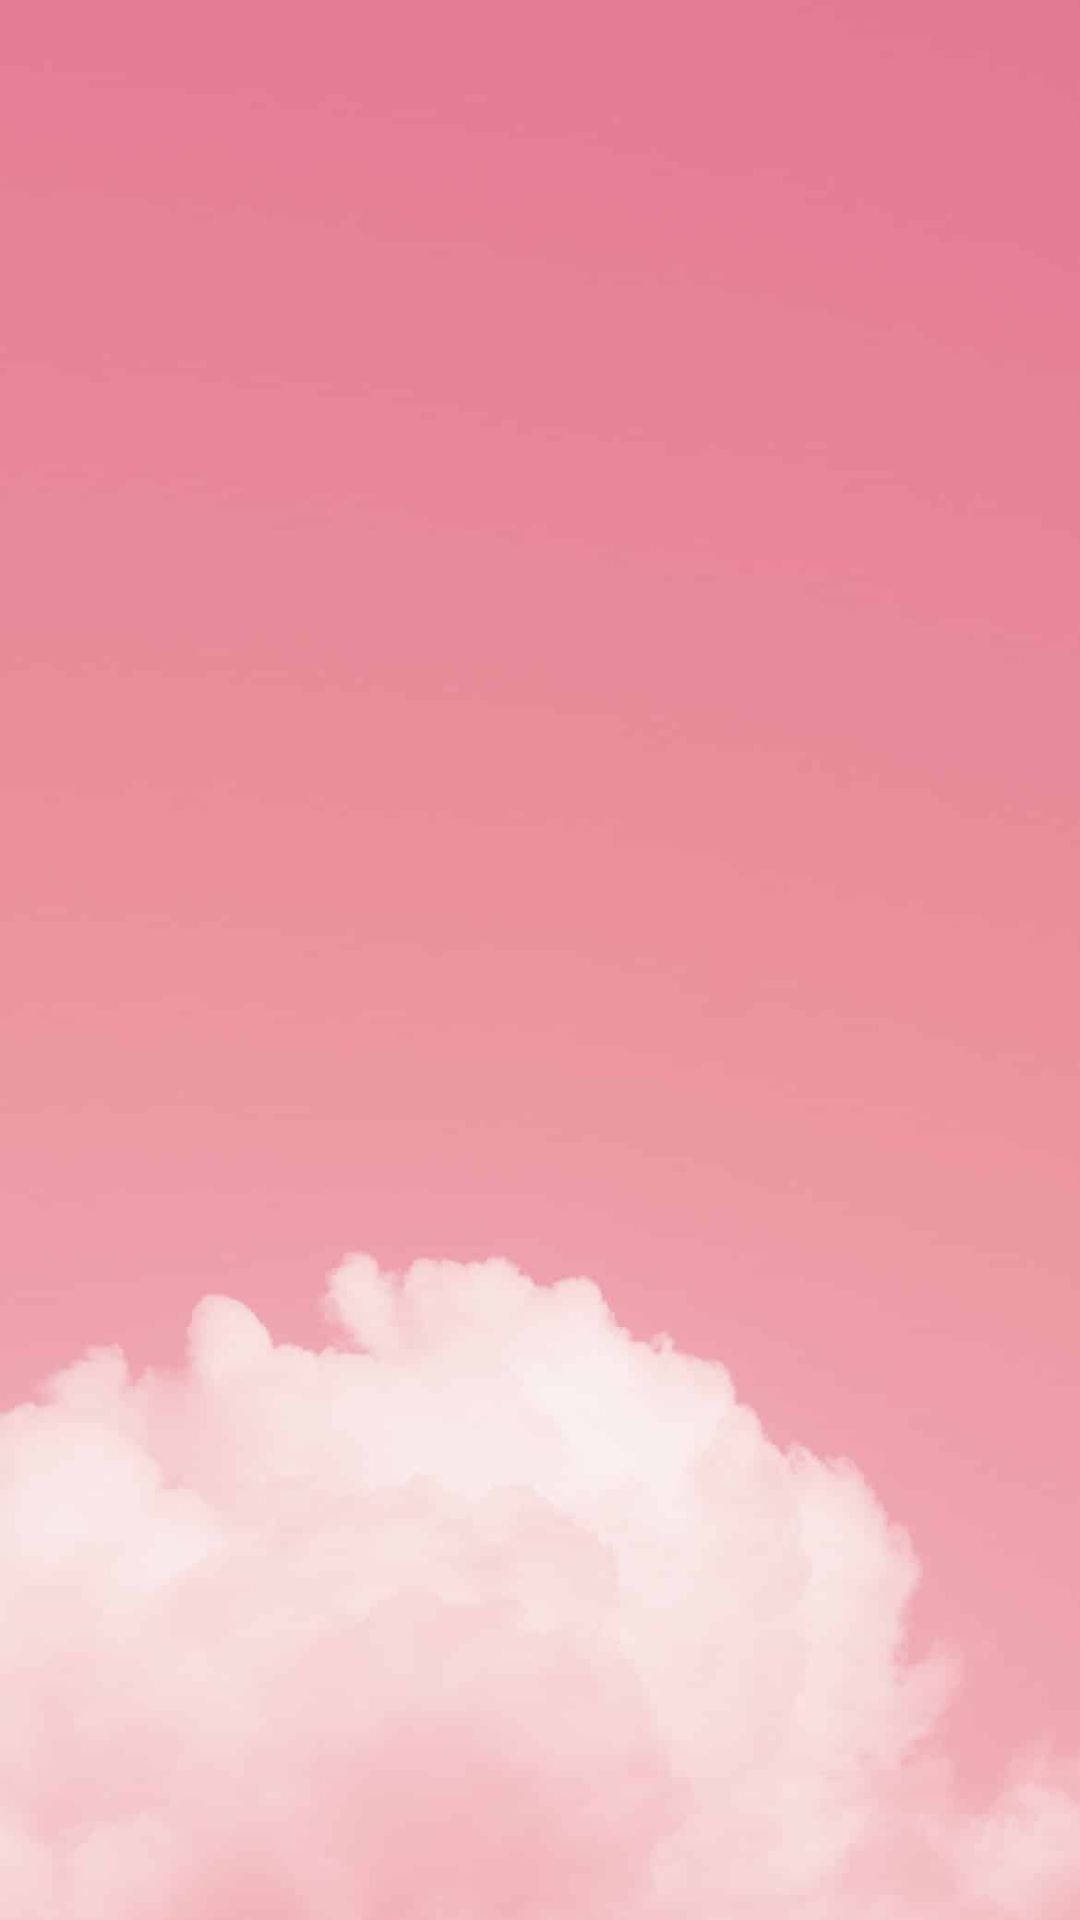 Aesthetic Pink Sky With A Cloud Background